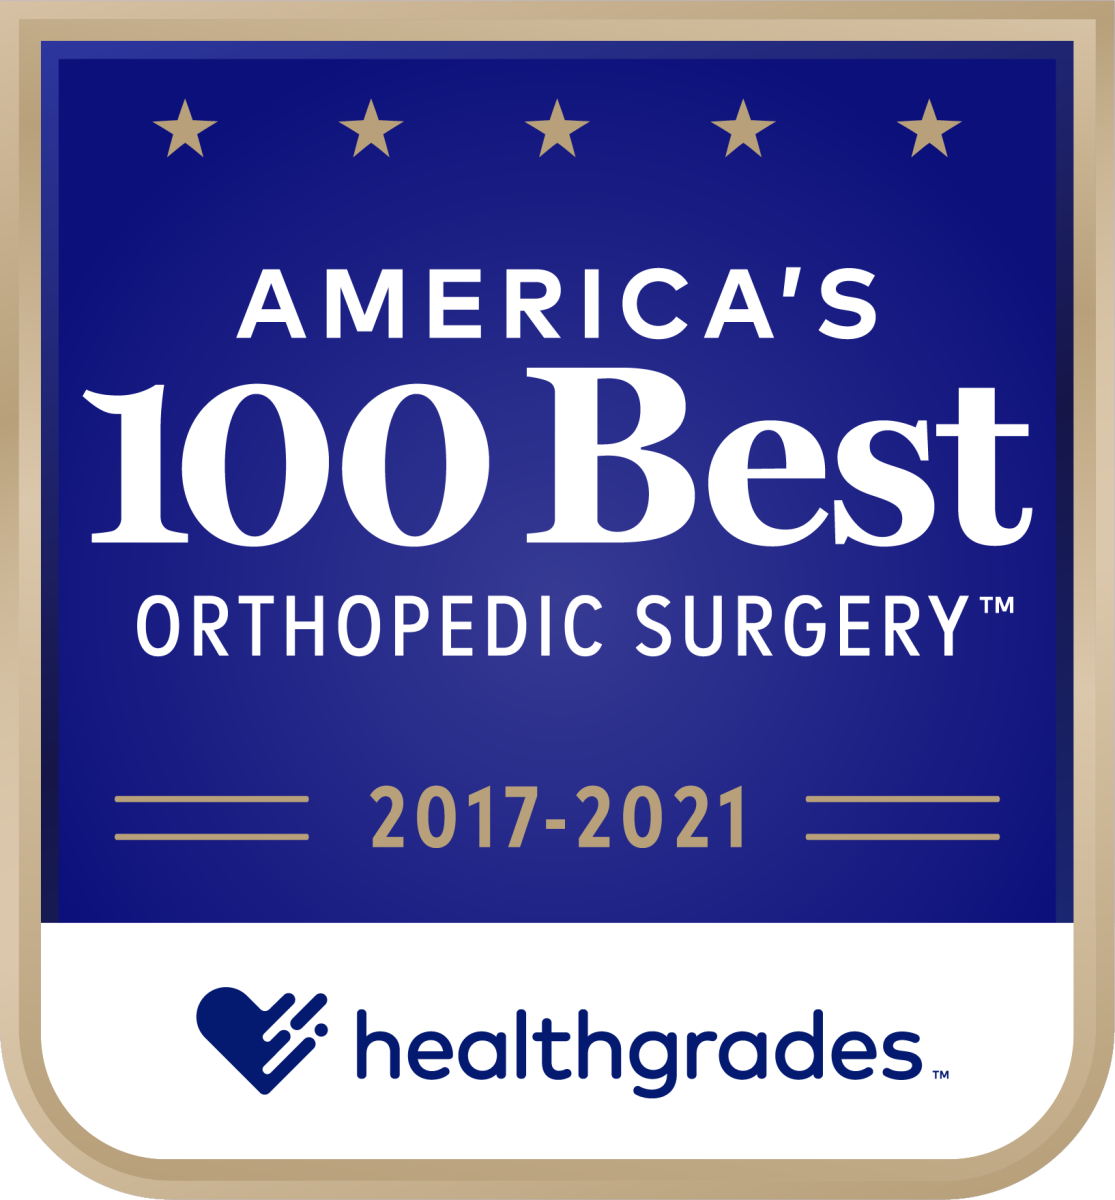 America's 100 Best Orthopedic Surgery 2017 to 2021